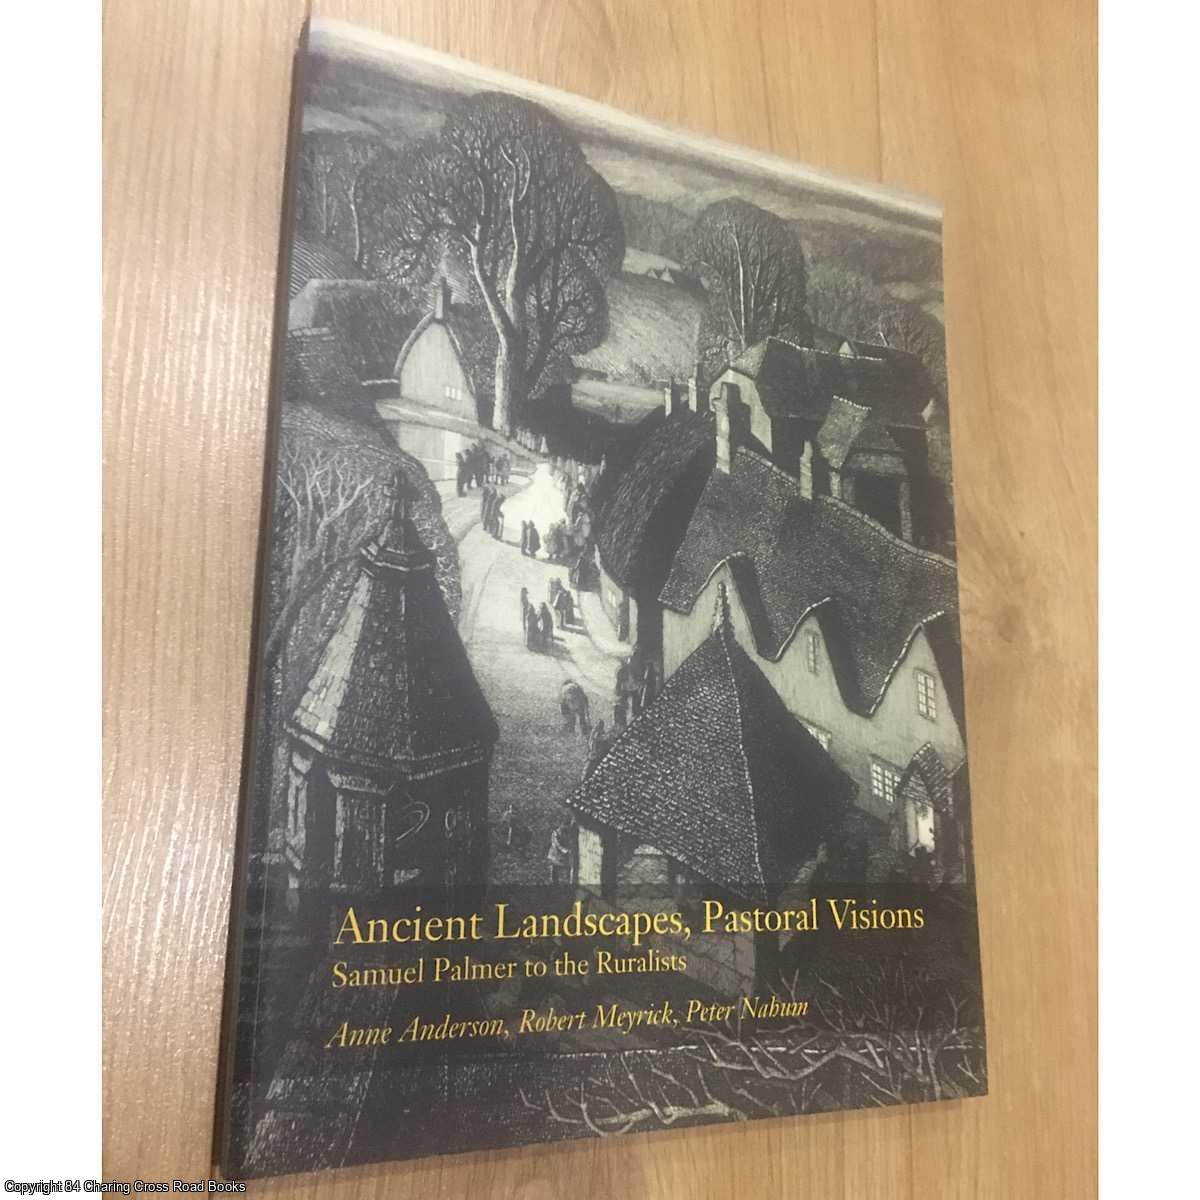 Anne Anderson, Robert Meyrick, Peter Nahum - Ancient Landscapes, Pastoral Visions: Samuel Palmer to the Ruralists